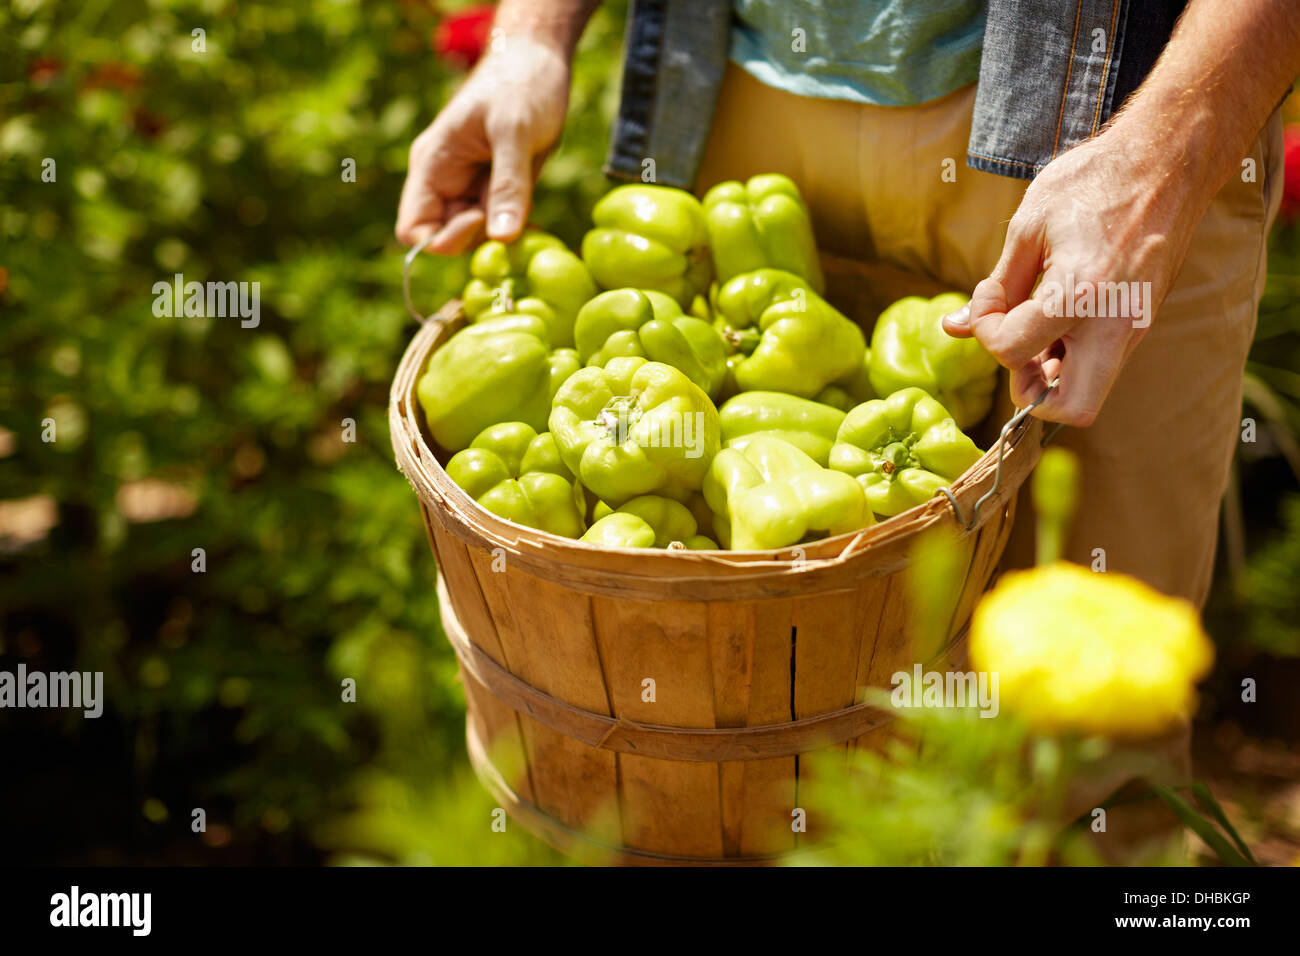 A man carrying a full basket of green bell peppers. Stock Photo